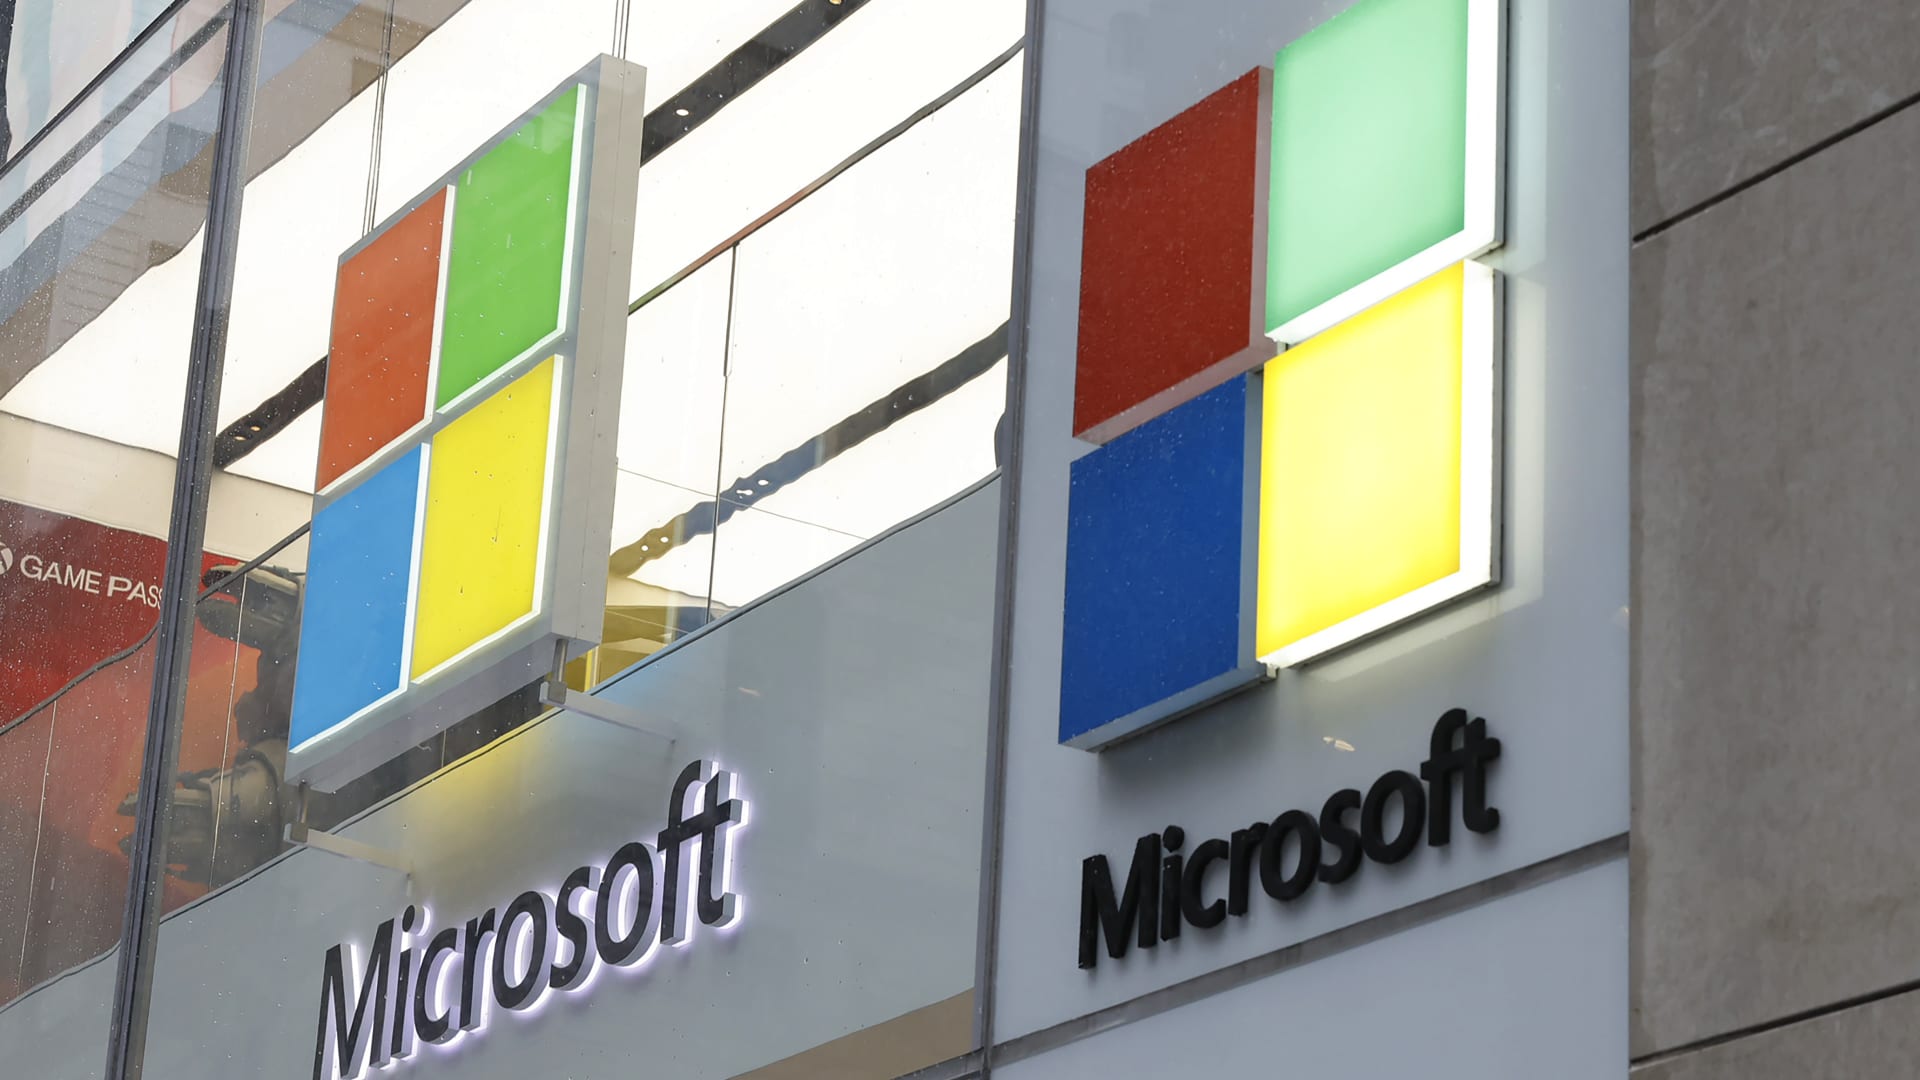 Microsoft's bullish PC outlook makes us want to buy more of this electronics retailer - CNBC